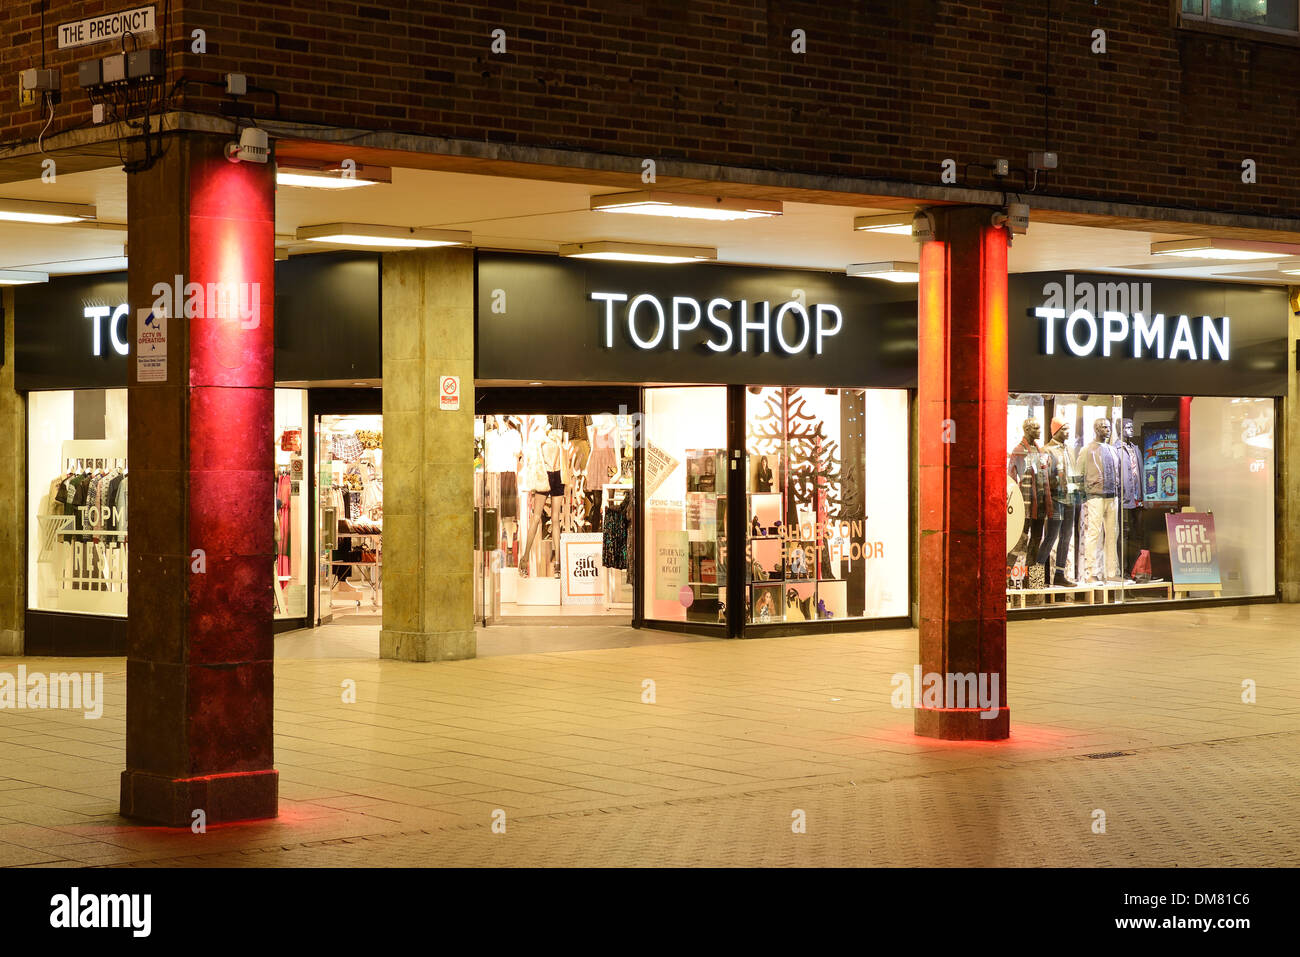 Exterior of Topshop and Topman shops in Coventry city centre Stock Photo